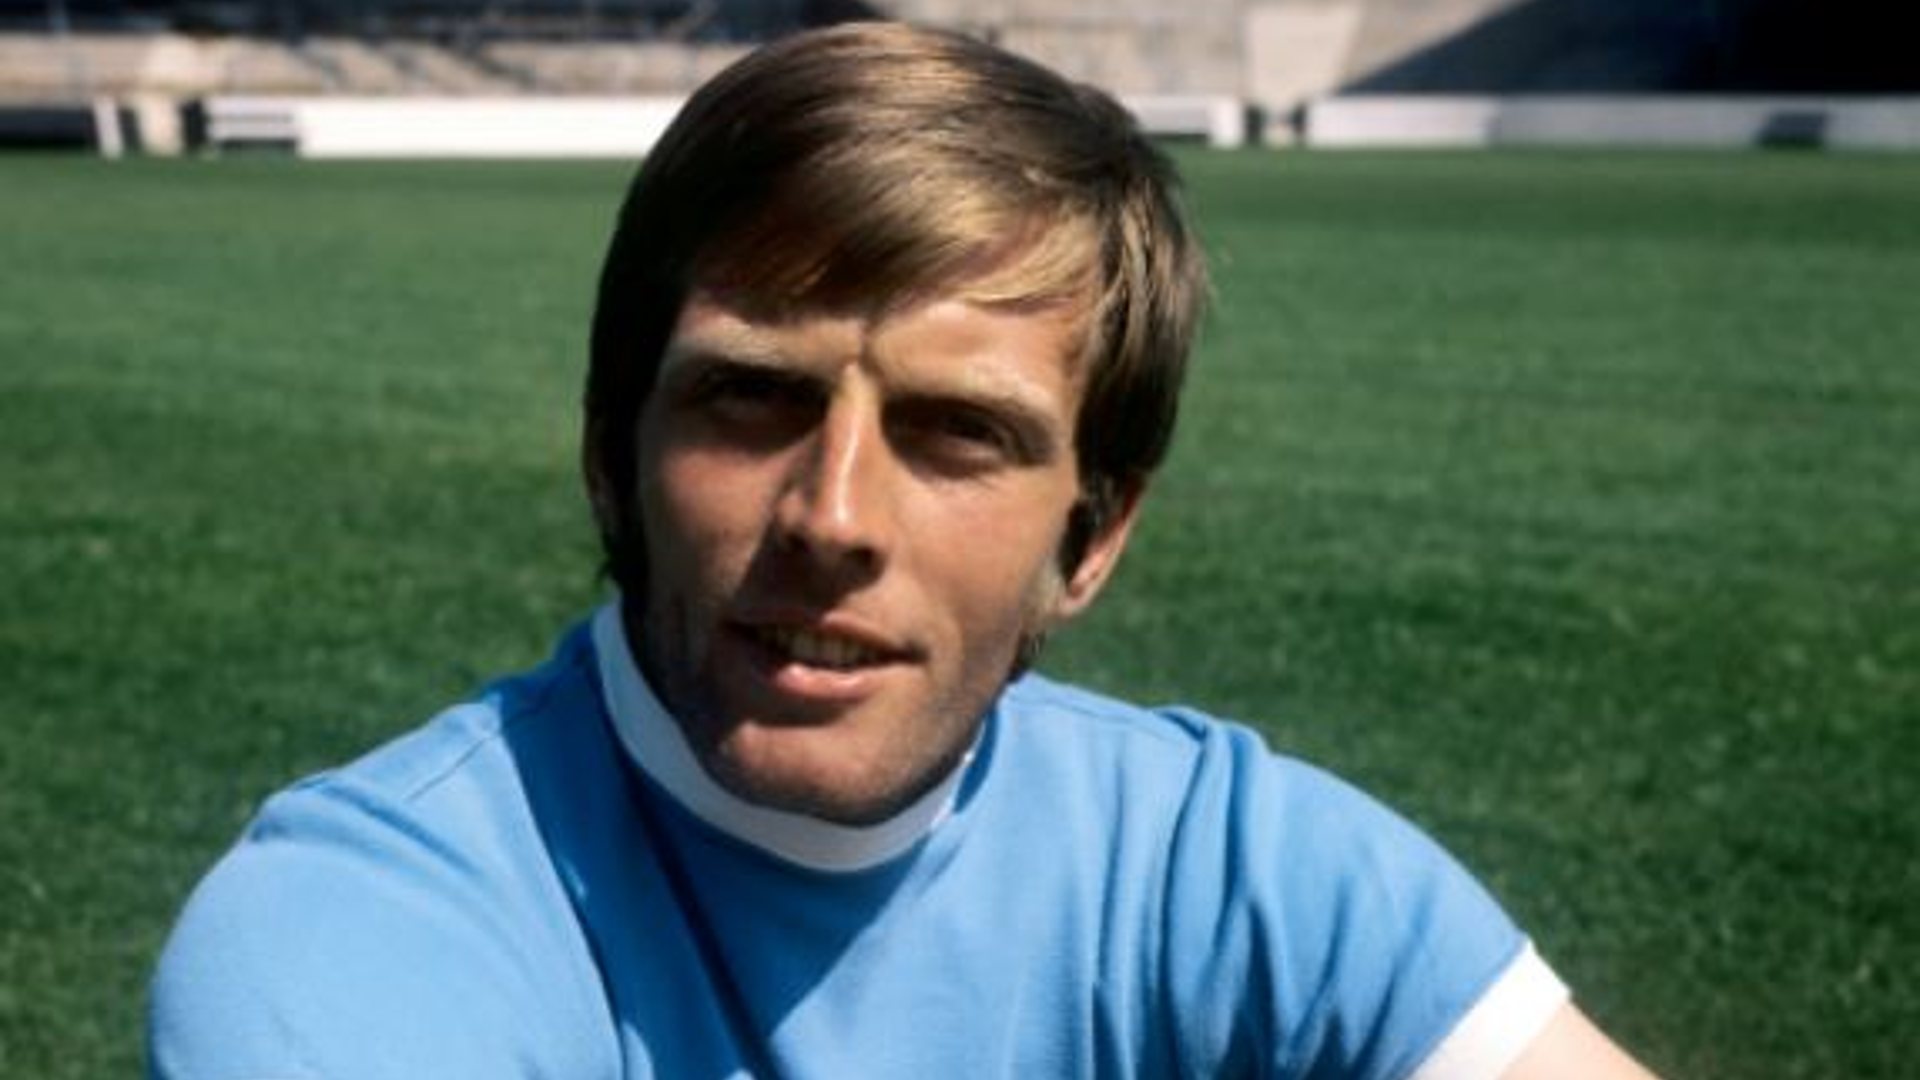 Alan Oakes for Manchester City, Credit: Twitter/@ManCity